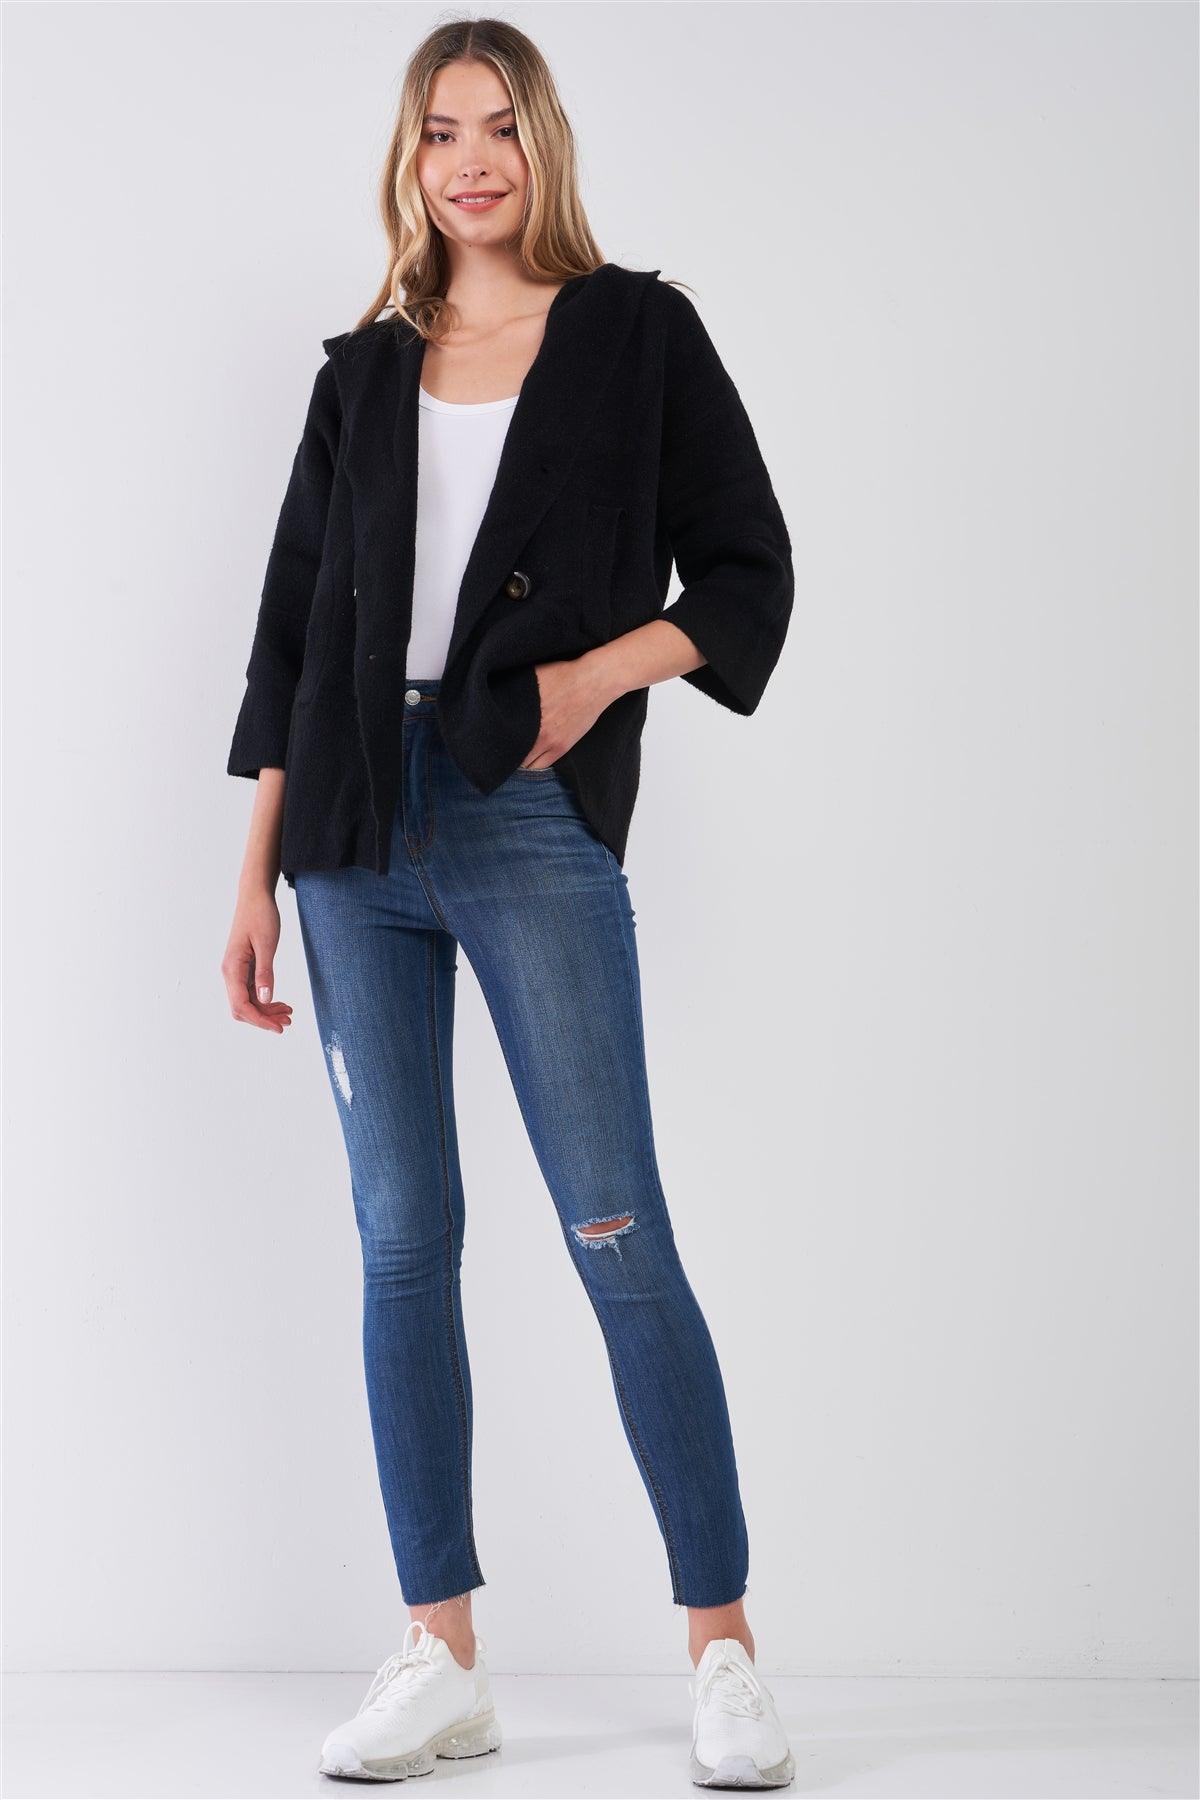 Black Knit Buttoned Front 3/4 Sleeve Hooded Cardigan